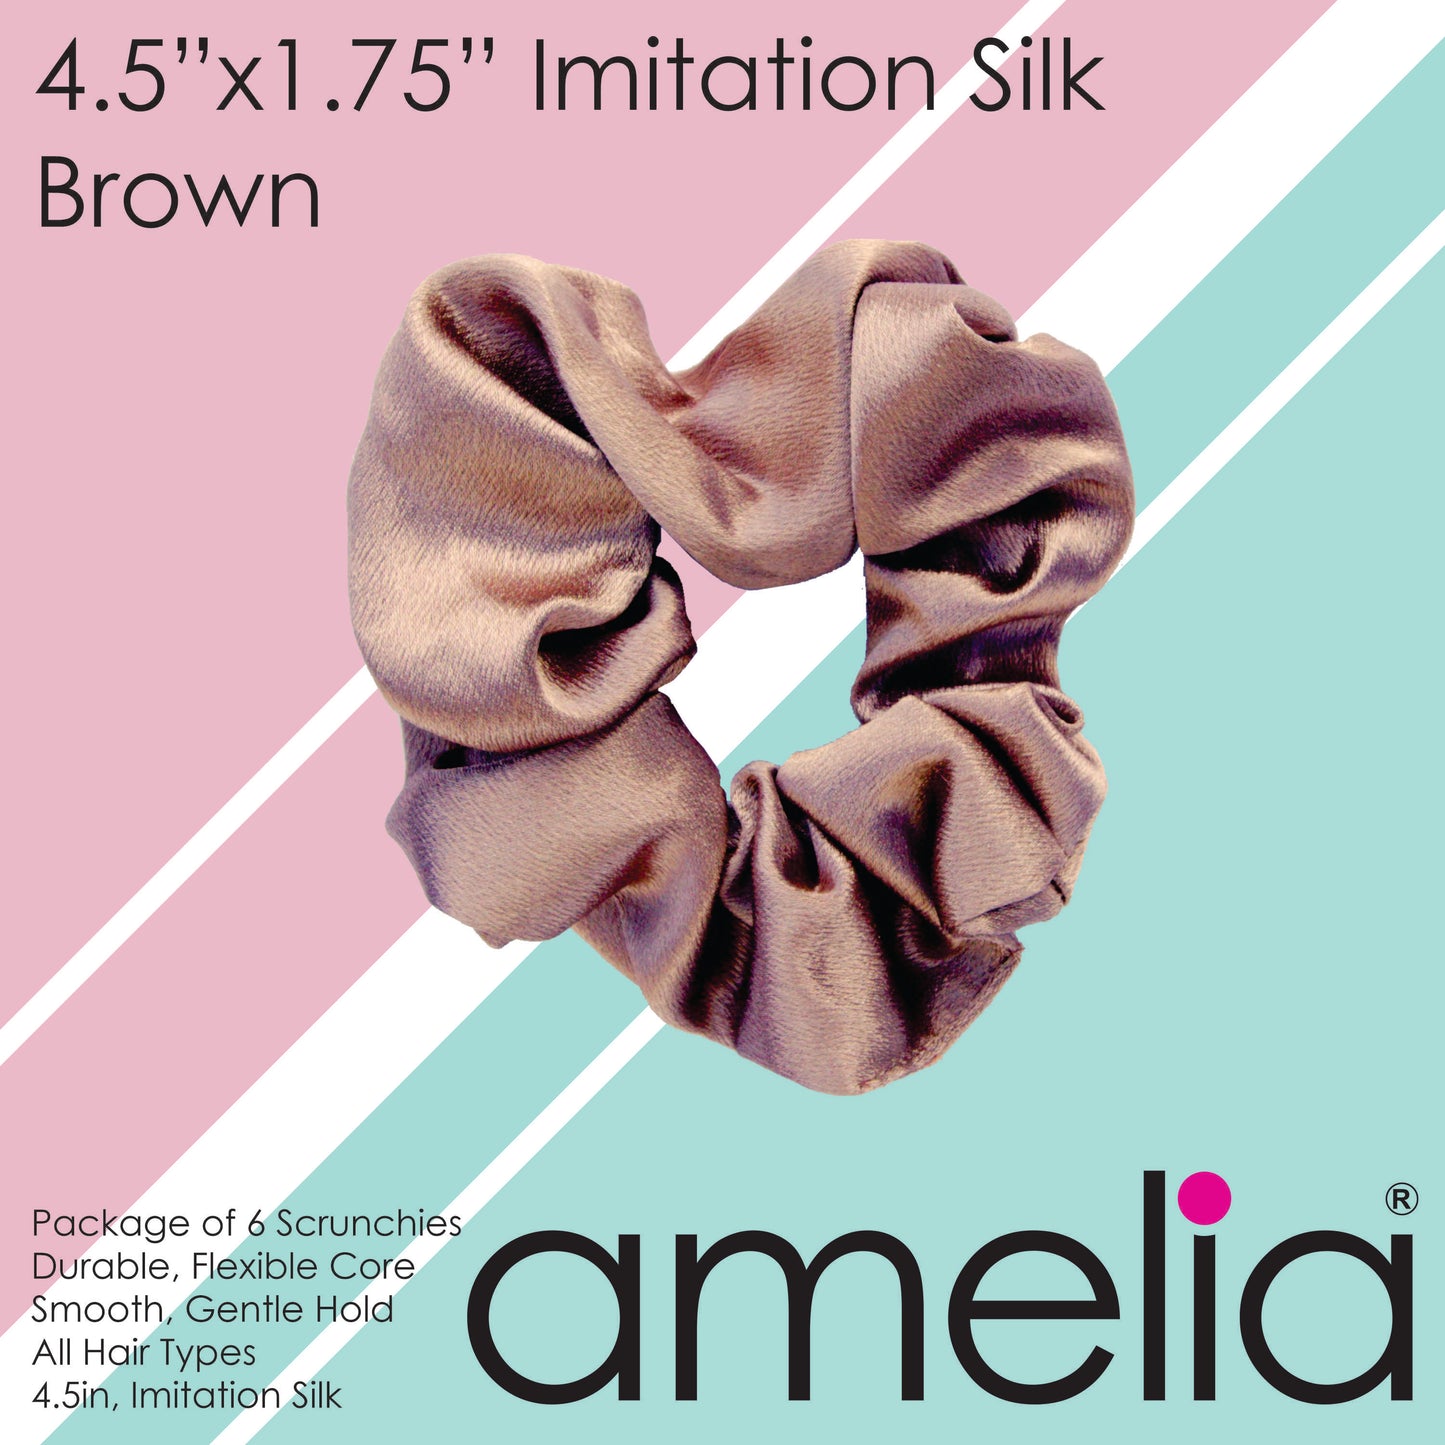 Amelia Beauty Products, Brown Imitation Silk Scrunchies, 4.5in Diameter, Gentle on Hair, Strong Hold, No Snag, No Dents or Creases. 6 Pack